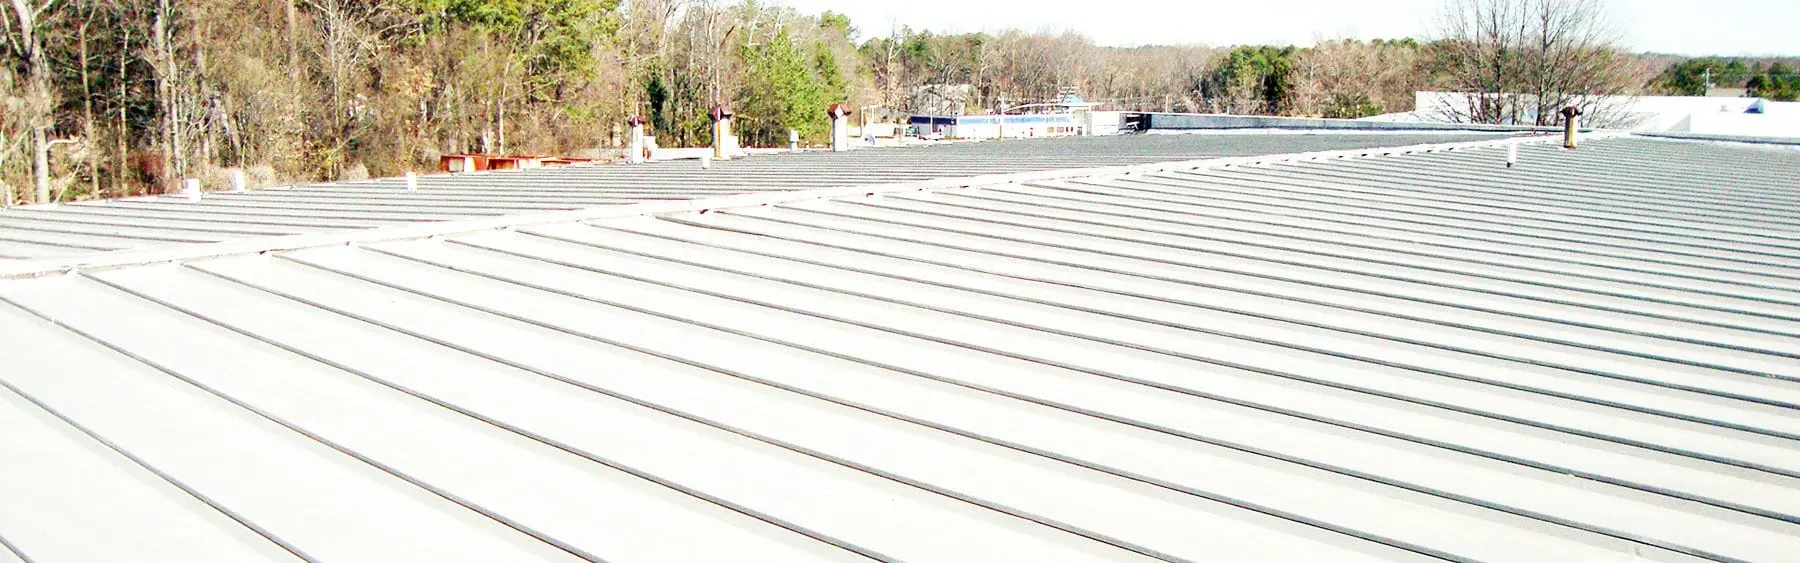 Commercial Roofing Project: The #1 Best Cover Board